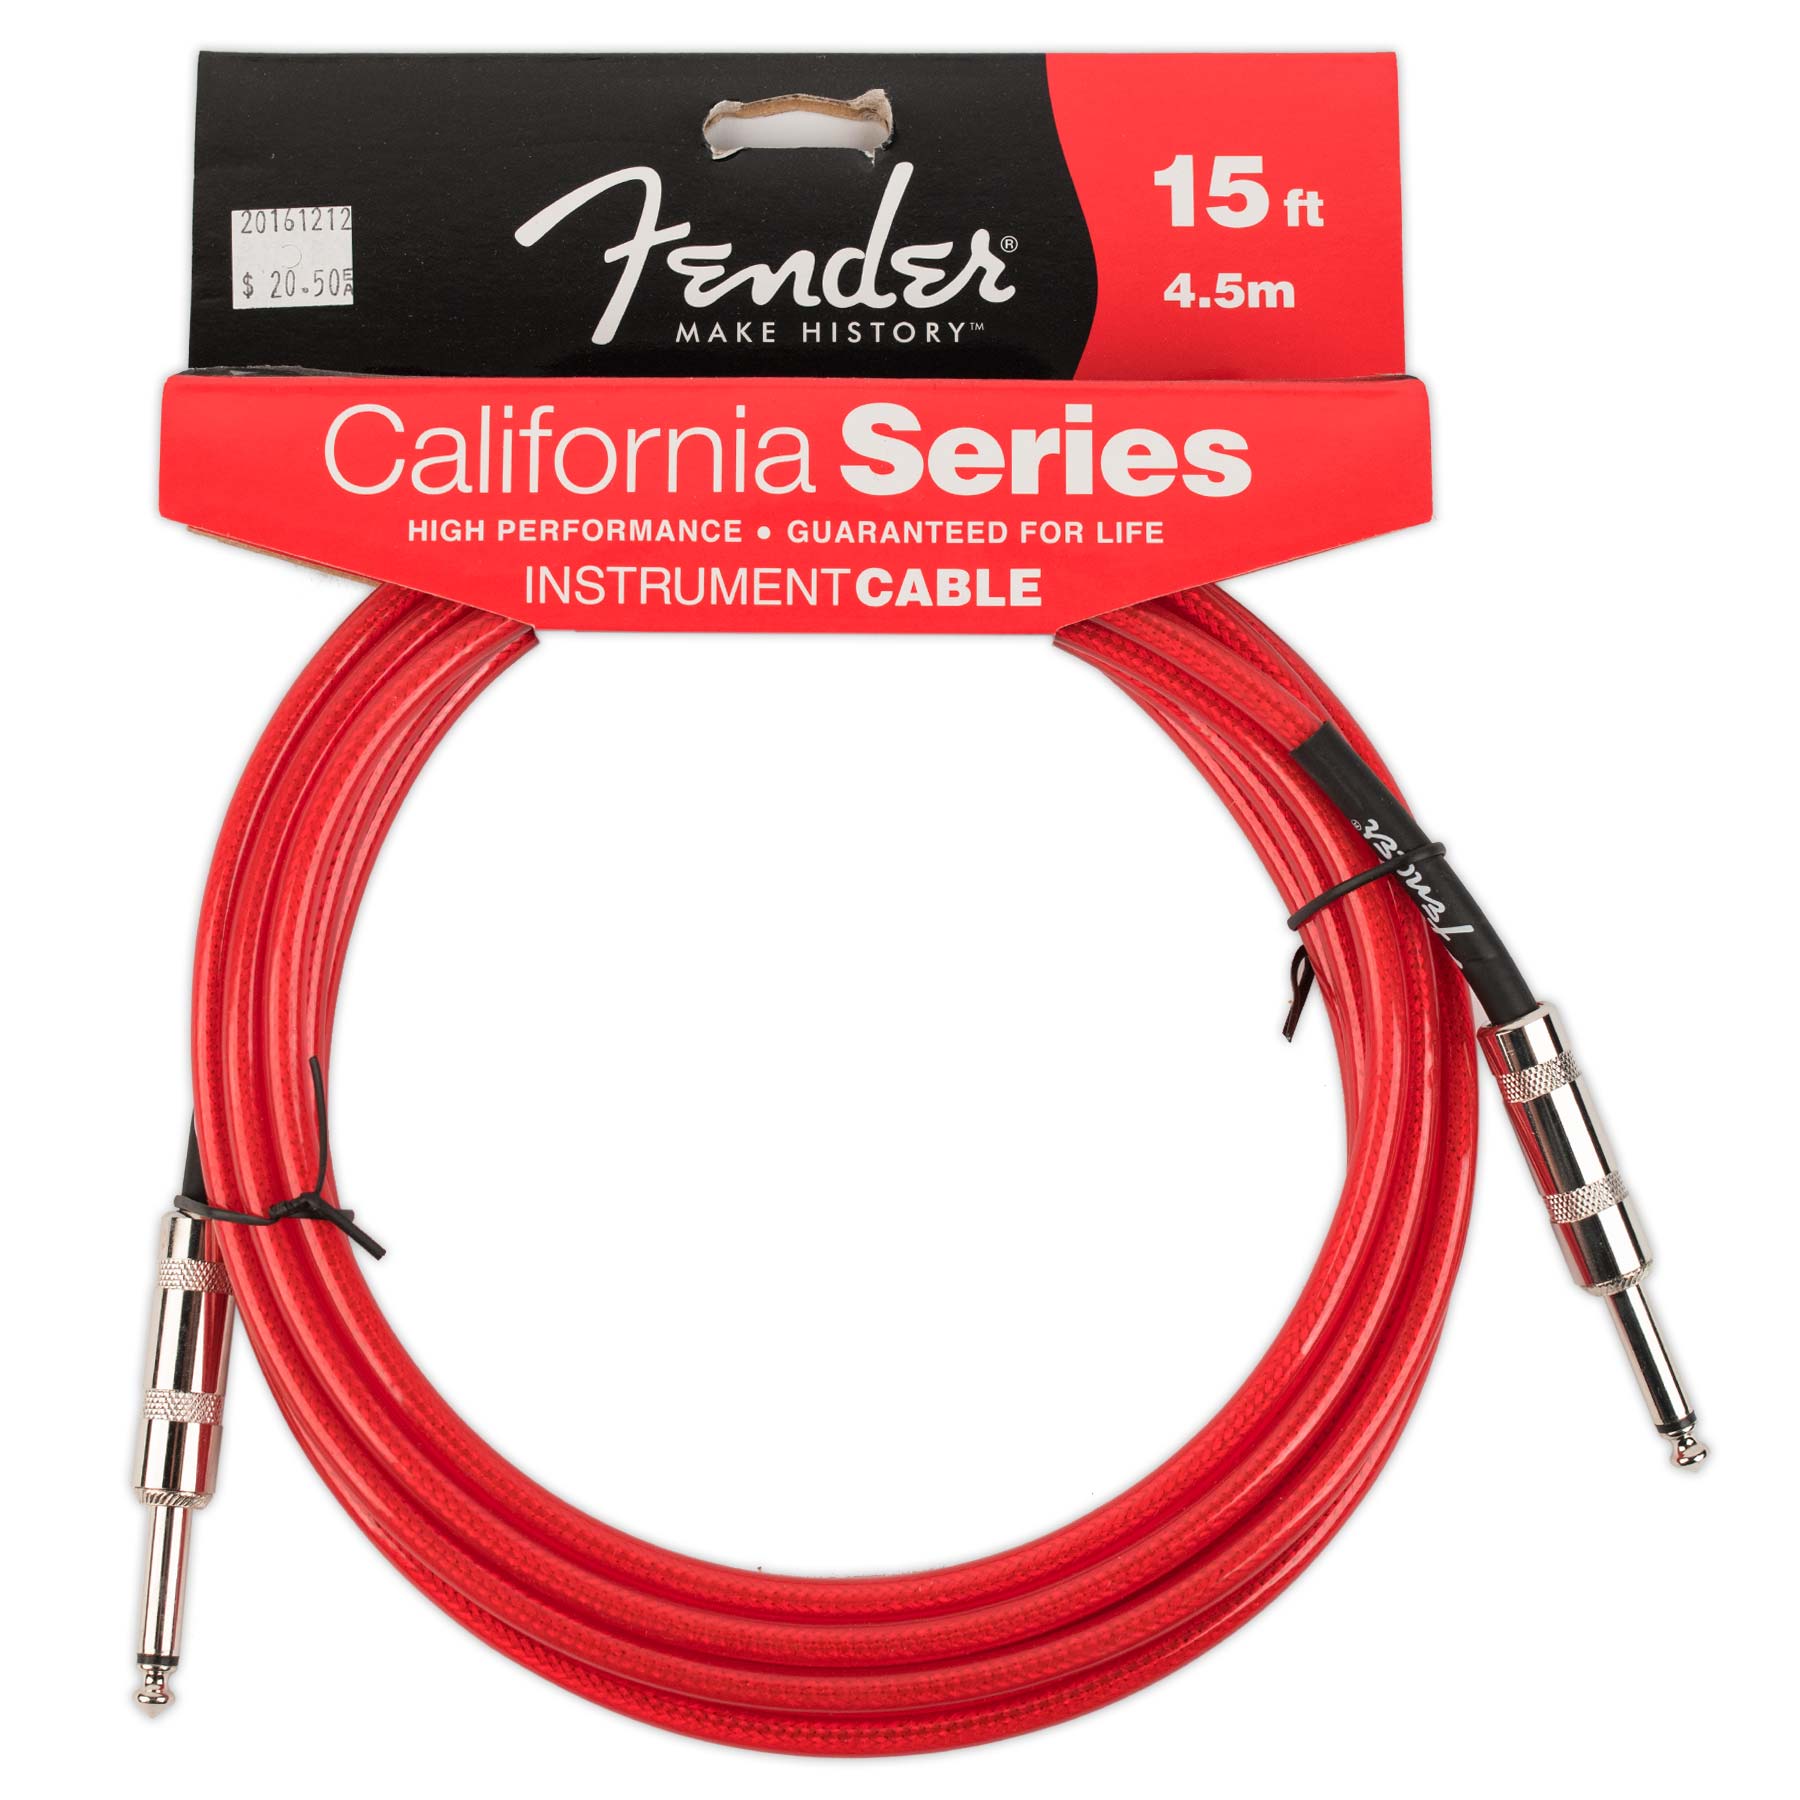 FENDER CALIFORNIA SERIES 15' INSTRUMENT CABLE CANDY APPLE RED